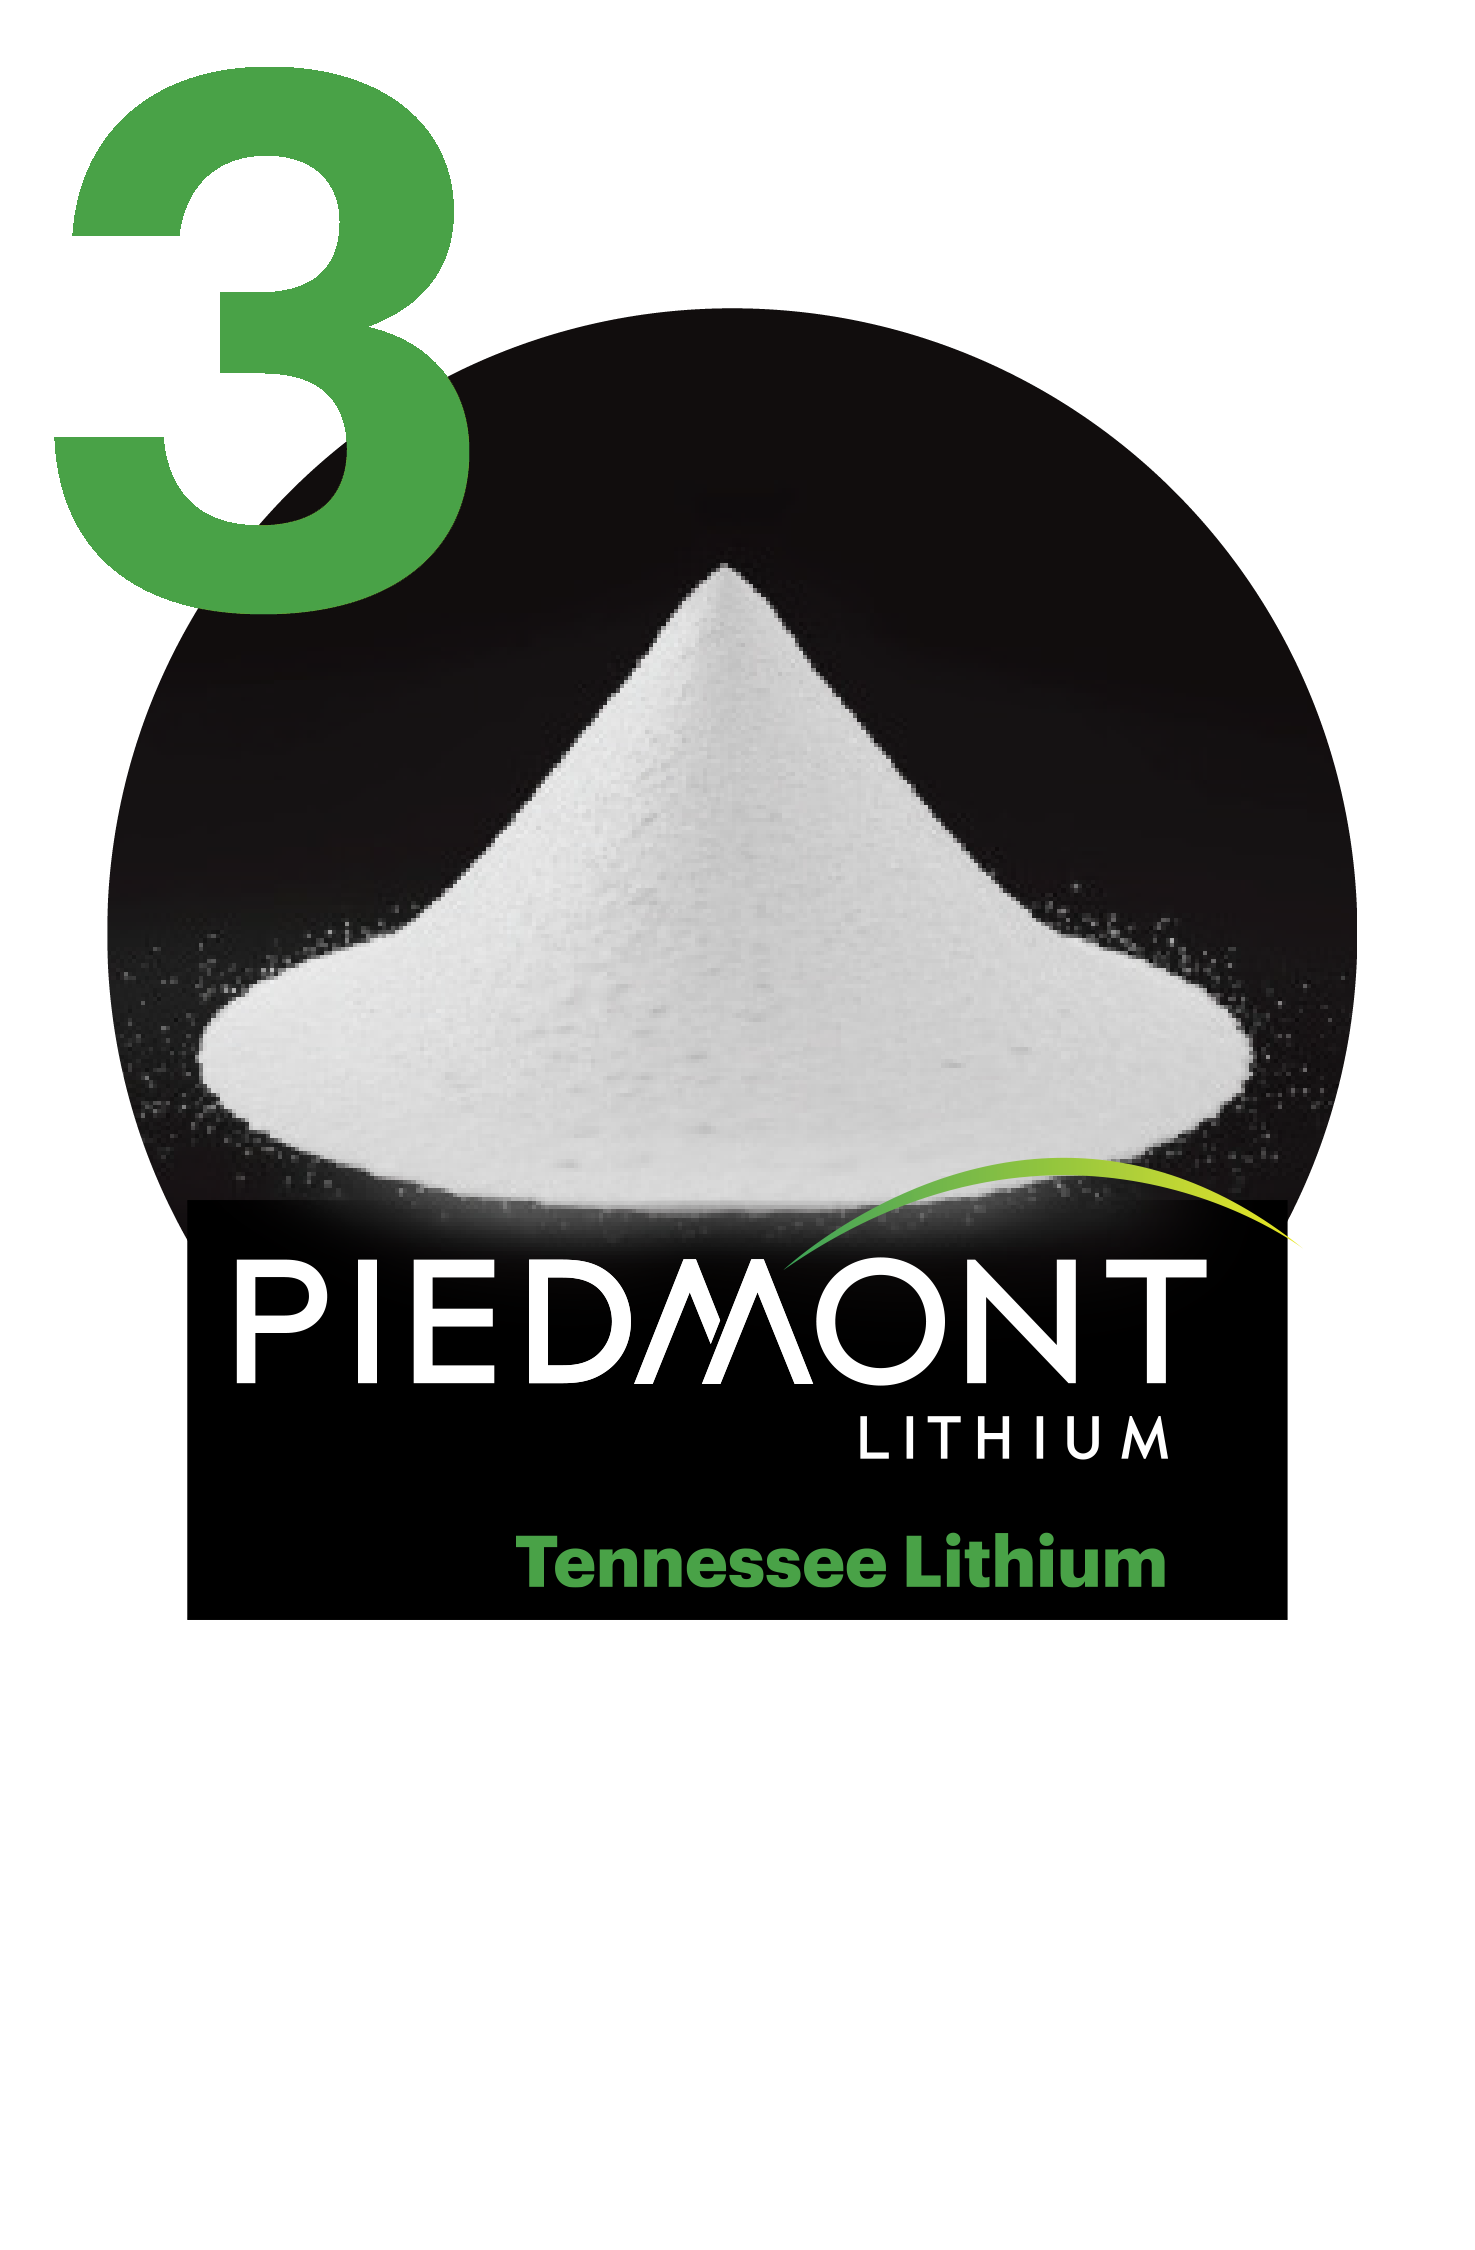 image of lithium hydroxide (which looks like table salt) and Piedmont Lithium's logo